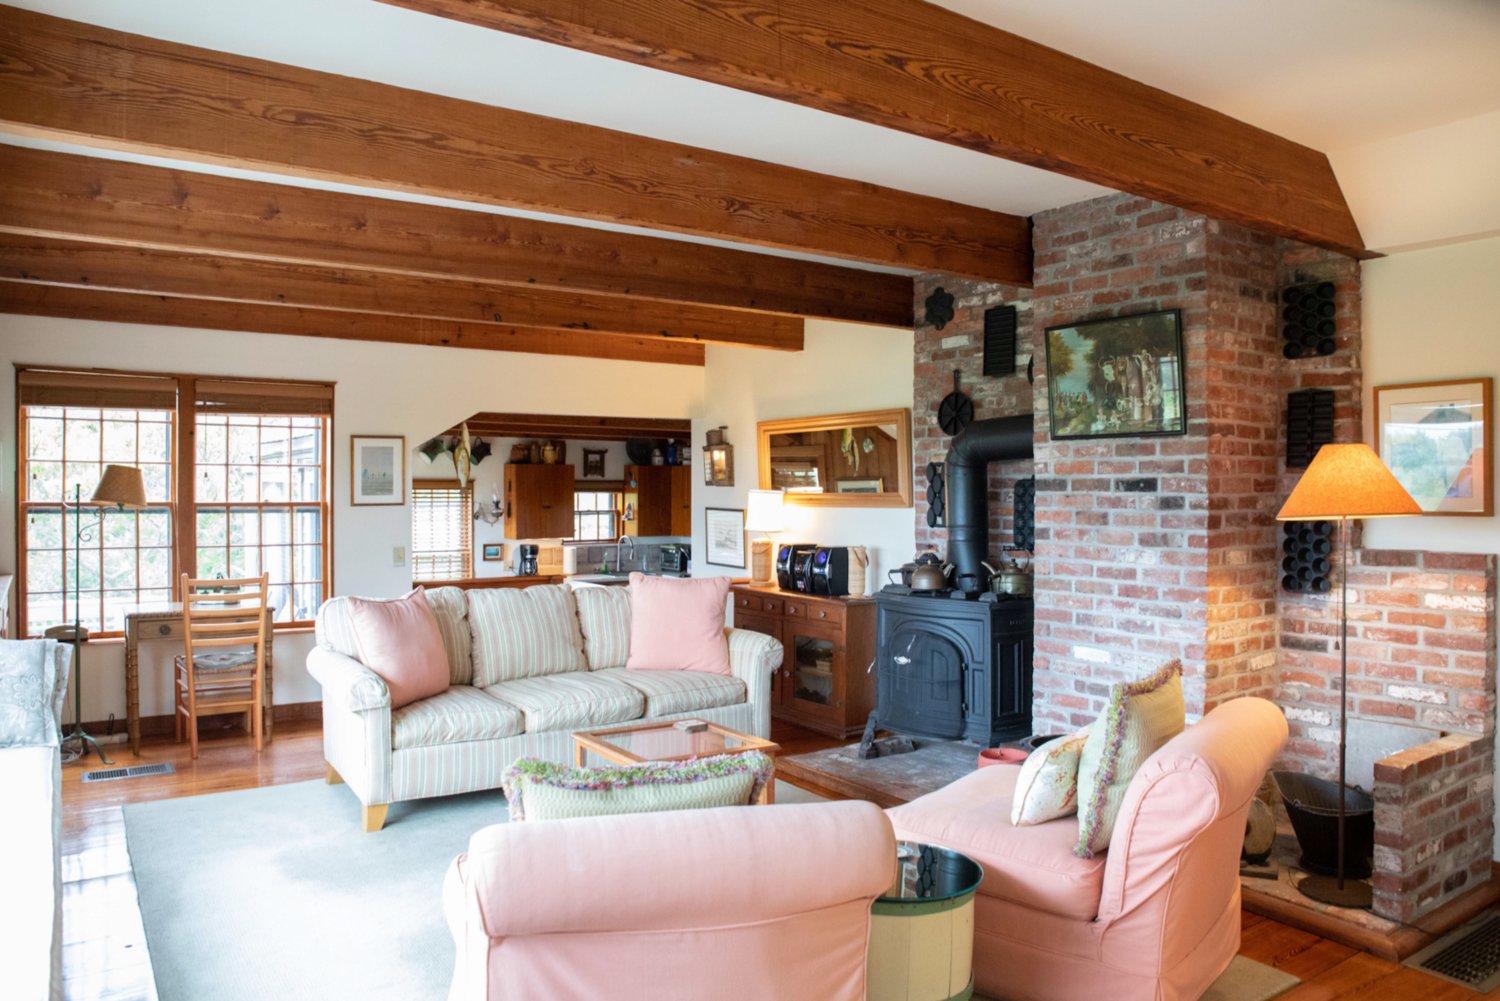 The open floor plan on the ground floor of the main house has water views and is accented by a wood stove.